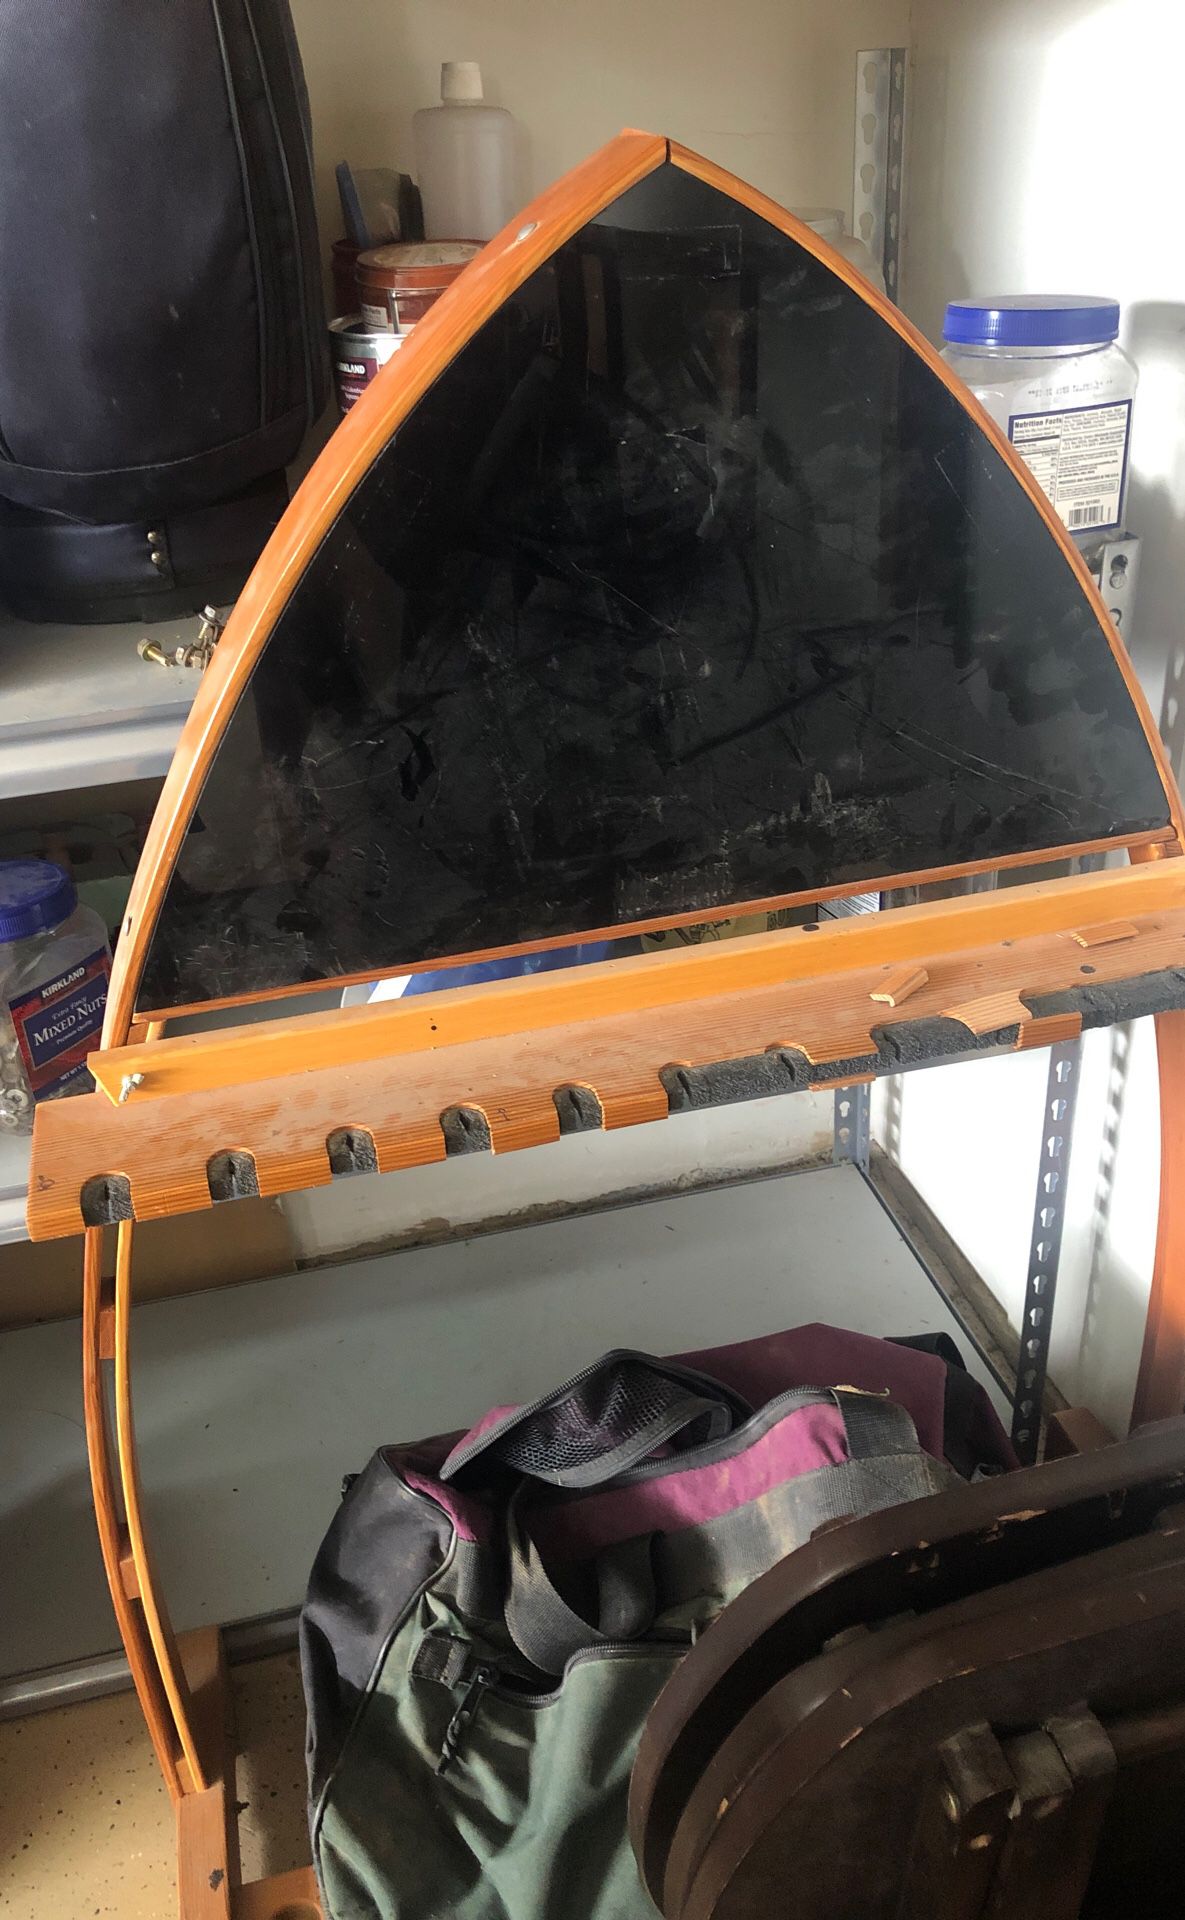 Fishing pole holder and display make offer